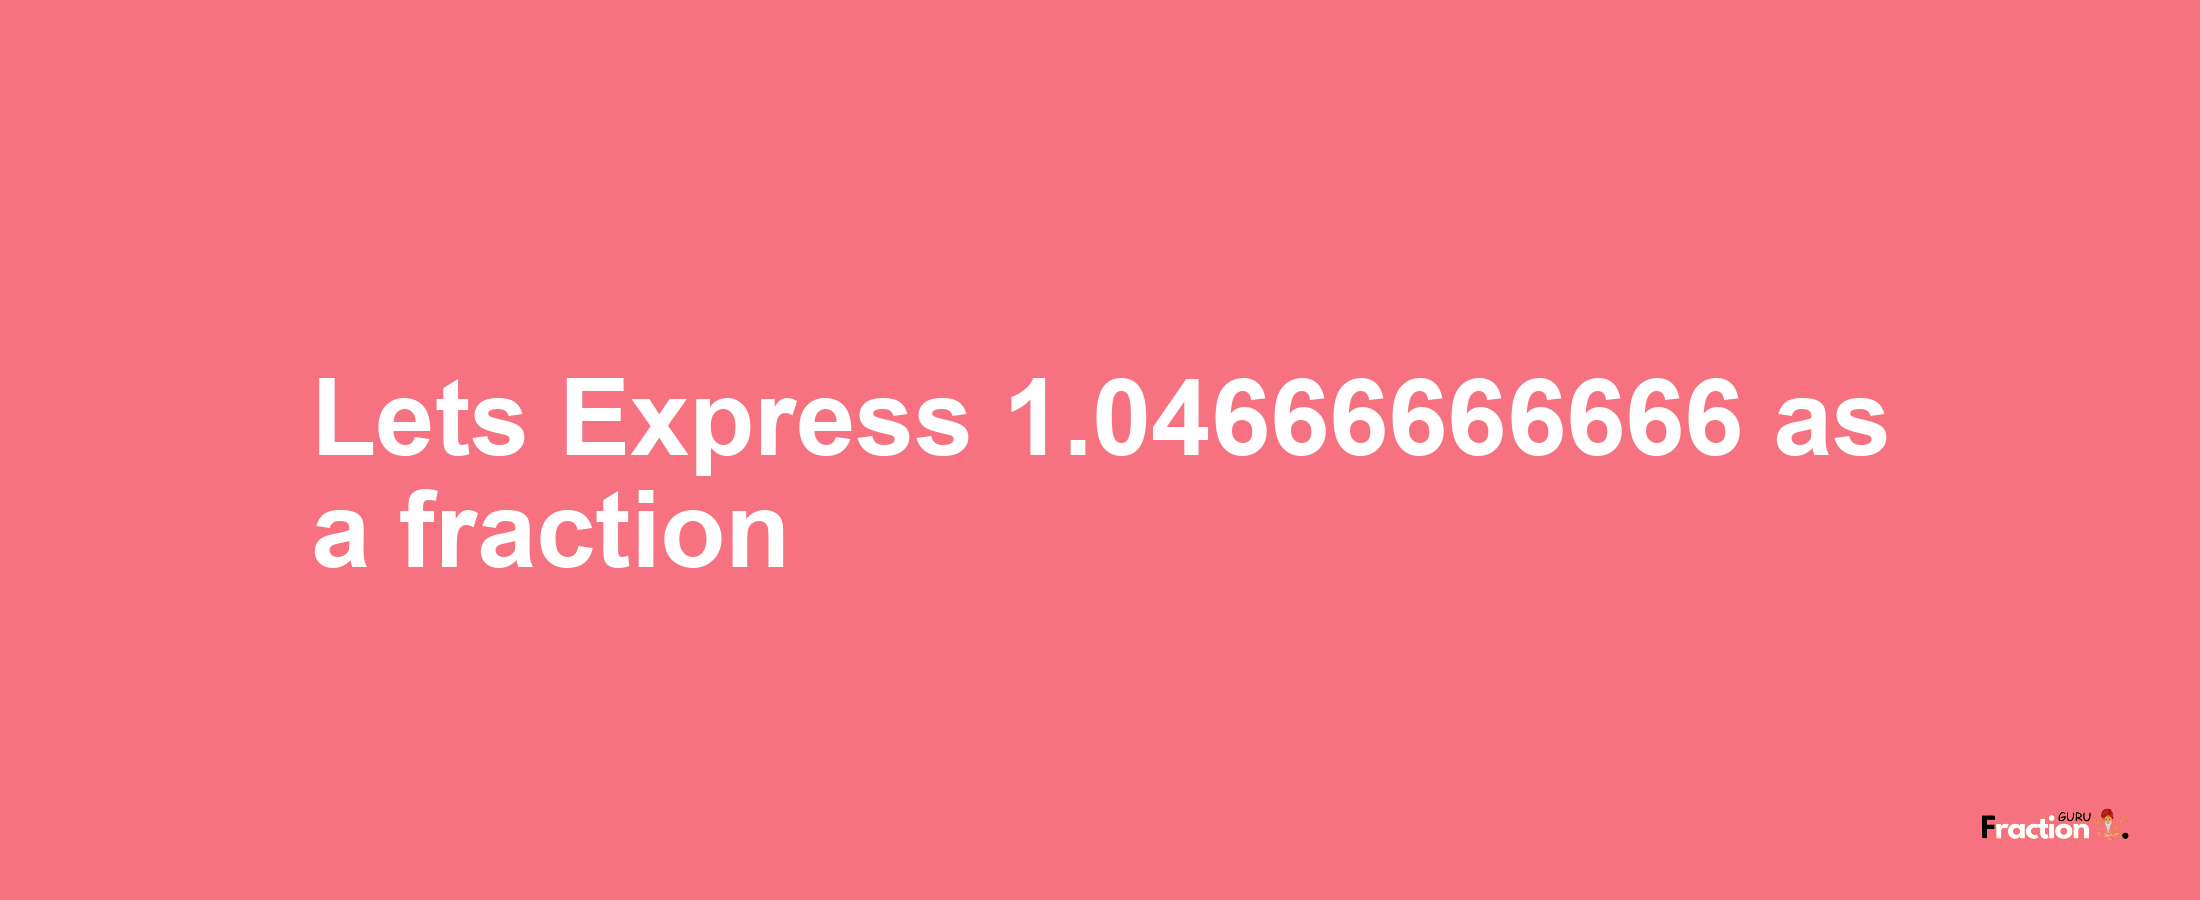 Lets Express 1.04666666666 as afraction